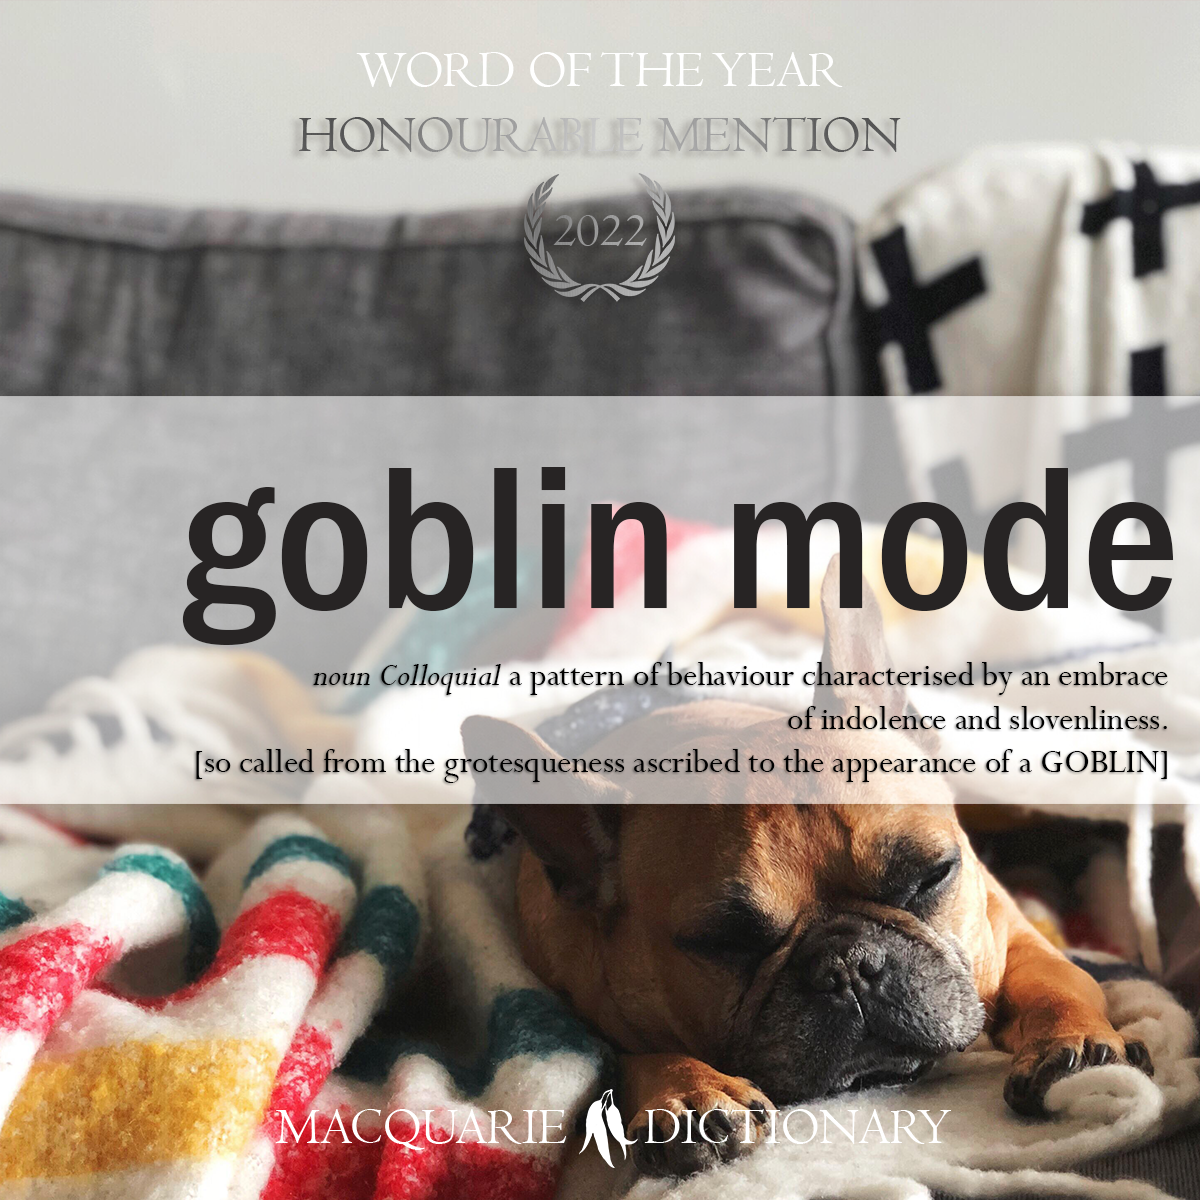 Word of the Year 2022 - goblin mode